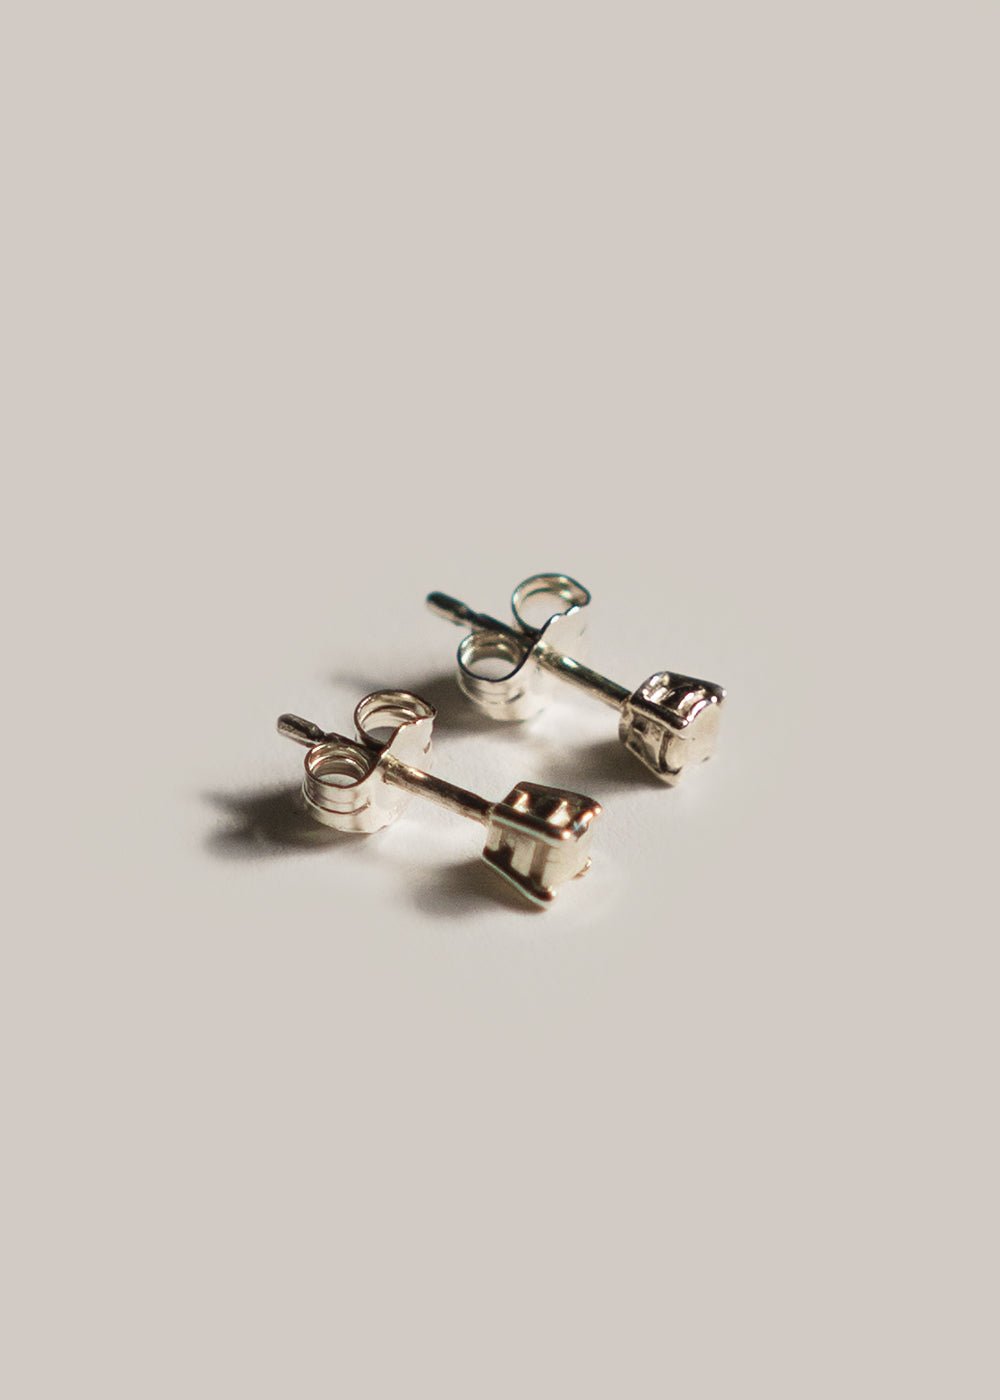 Martine Ali Silver Stone Prince Earrings - New Classics Studios Sustainable Ethical Fashion Canada